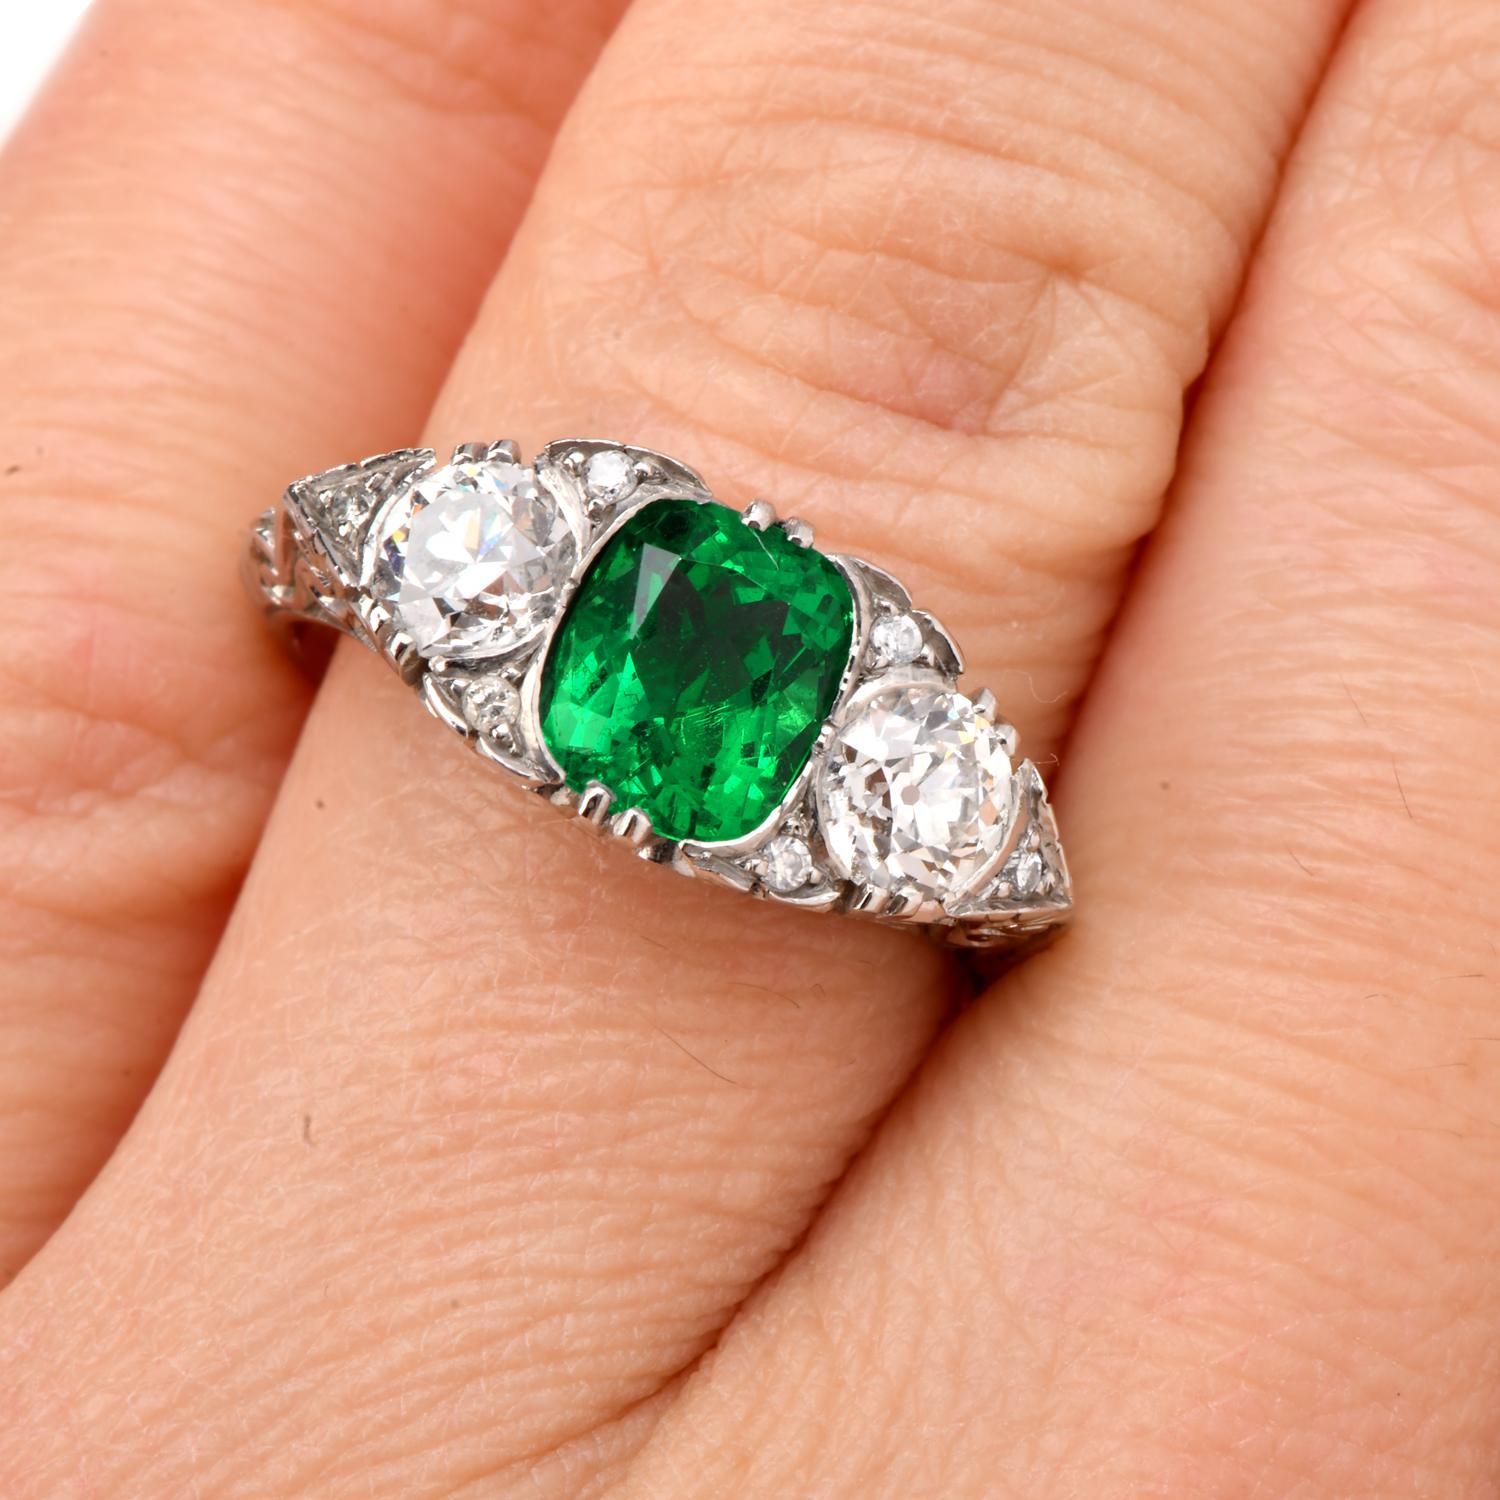 Vintage AGL AND GIA  certified NO OIL Colombian Emerald Diamond Platinum Ring

Very Few Emeralds have a badge of NO OIL on them. This high-end rare Filigree High Rise band is adorned with diamonds and Emerald crafted in Platinum. GIA Certified